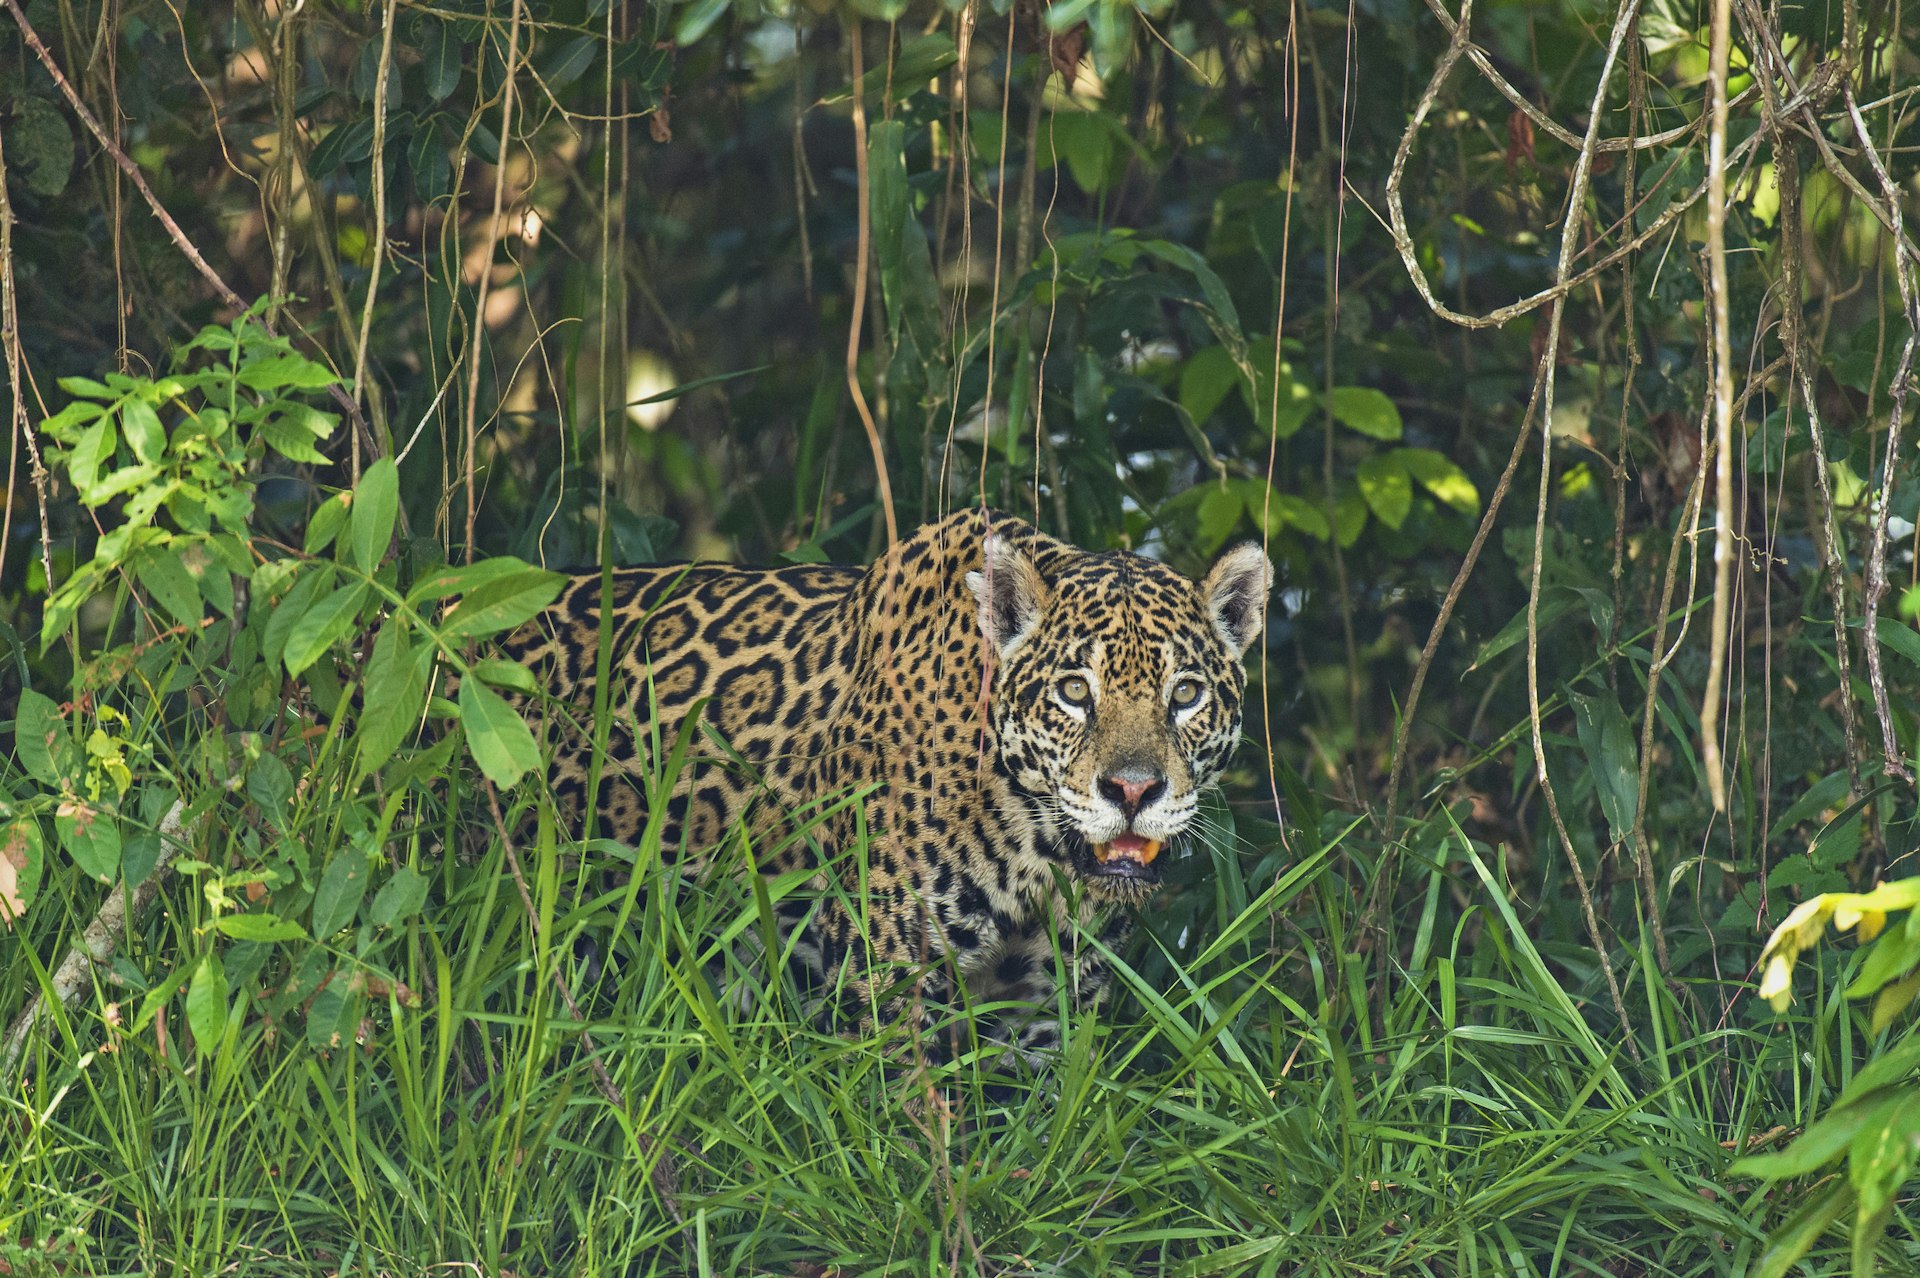 A walking jaguar makes eye contact in the grasses of the Pantanal, Brazil